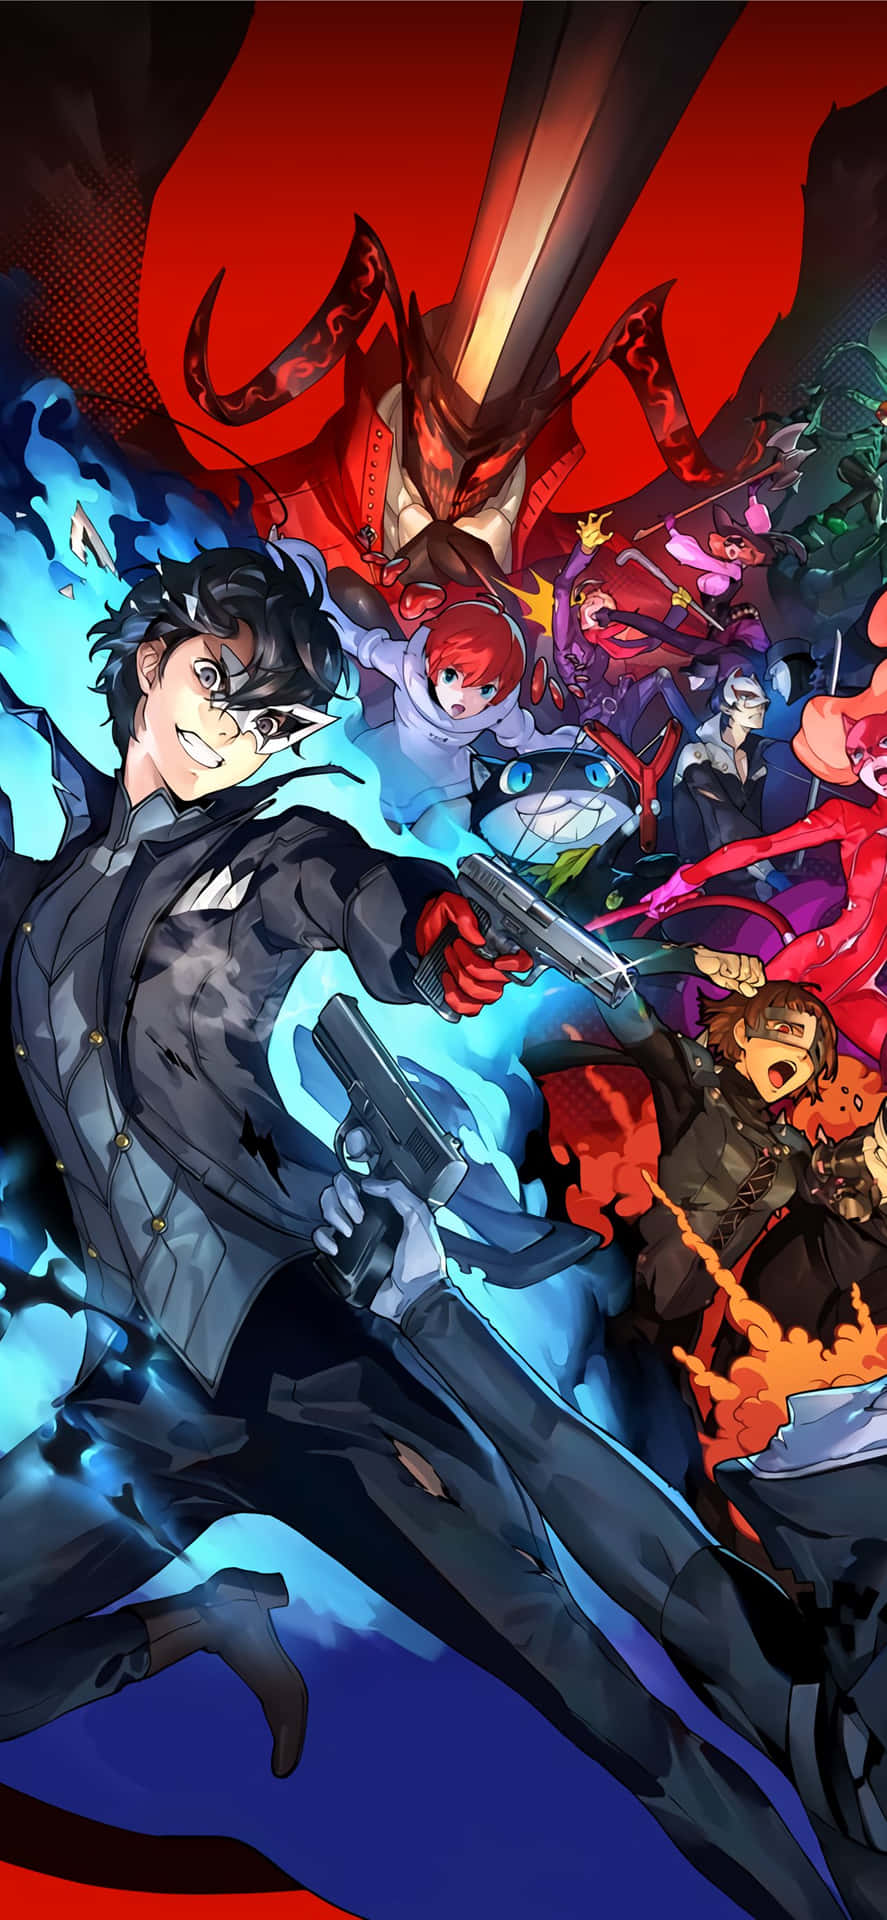 Get ready for the thrilling ride of Persona 5 now available on iPhone Wallpaper